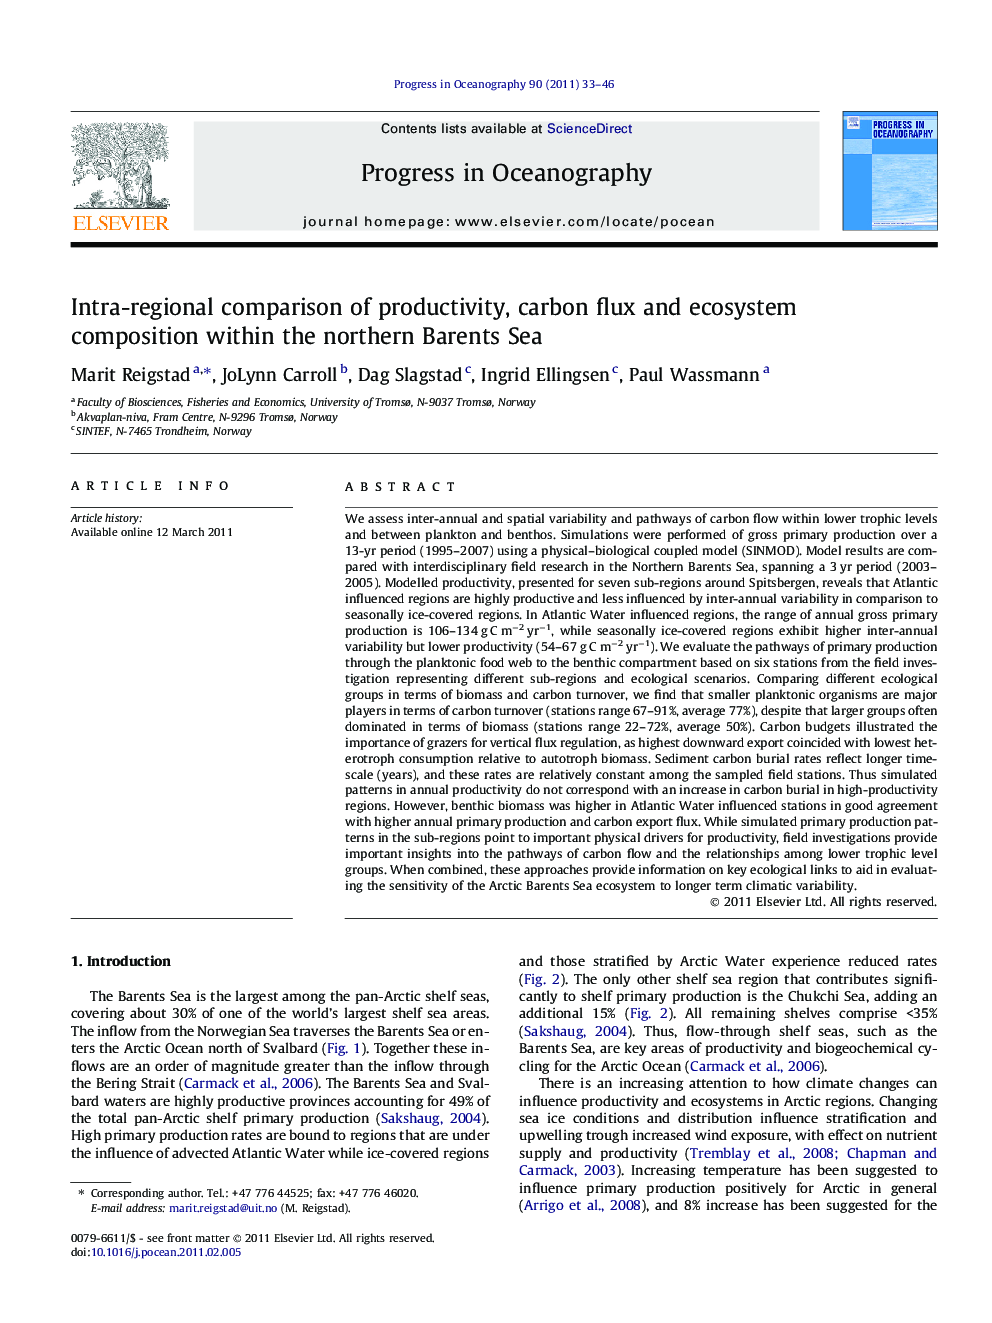 Intra-regional comparison of productivity, carbon flux and ecosystem composition within the northern Barents Sea